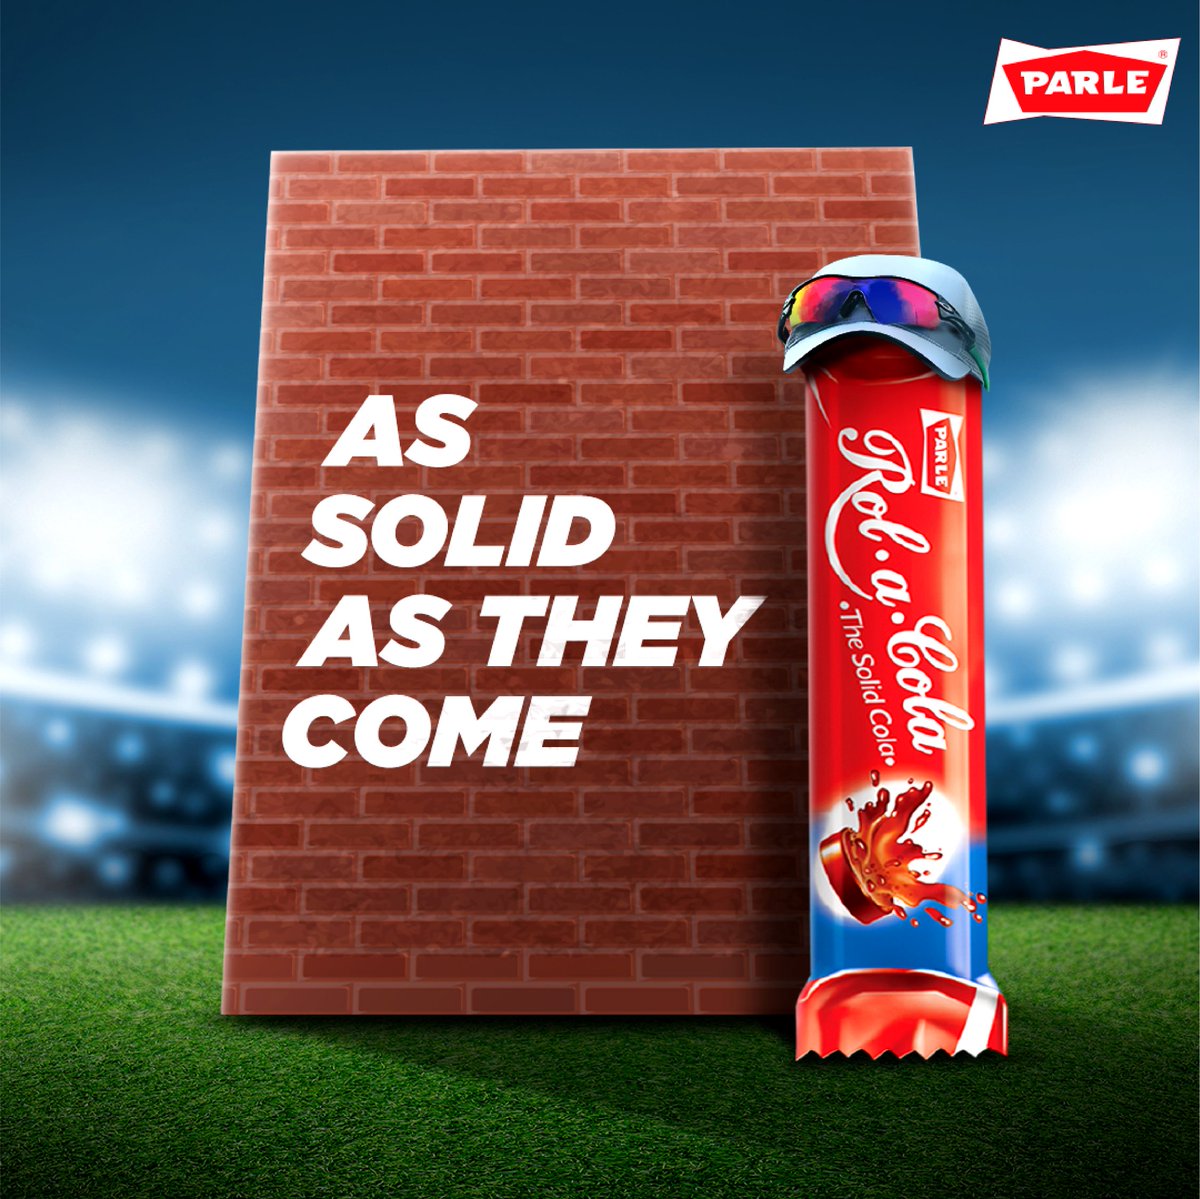 It'll be a gentleman's game again. #RahulDravid #ParleProducts #ParleFamily #ParleConfectionery #RolaCola #SolidCola #Cricket #CricketSeason #Trending #Topical